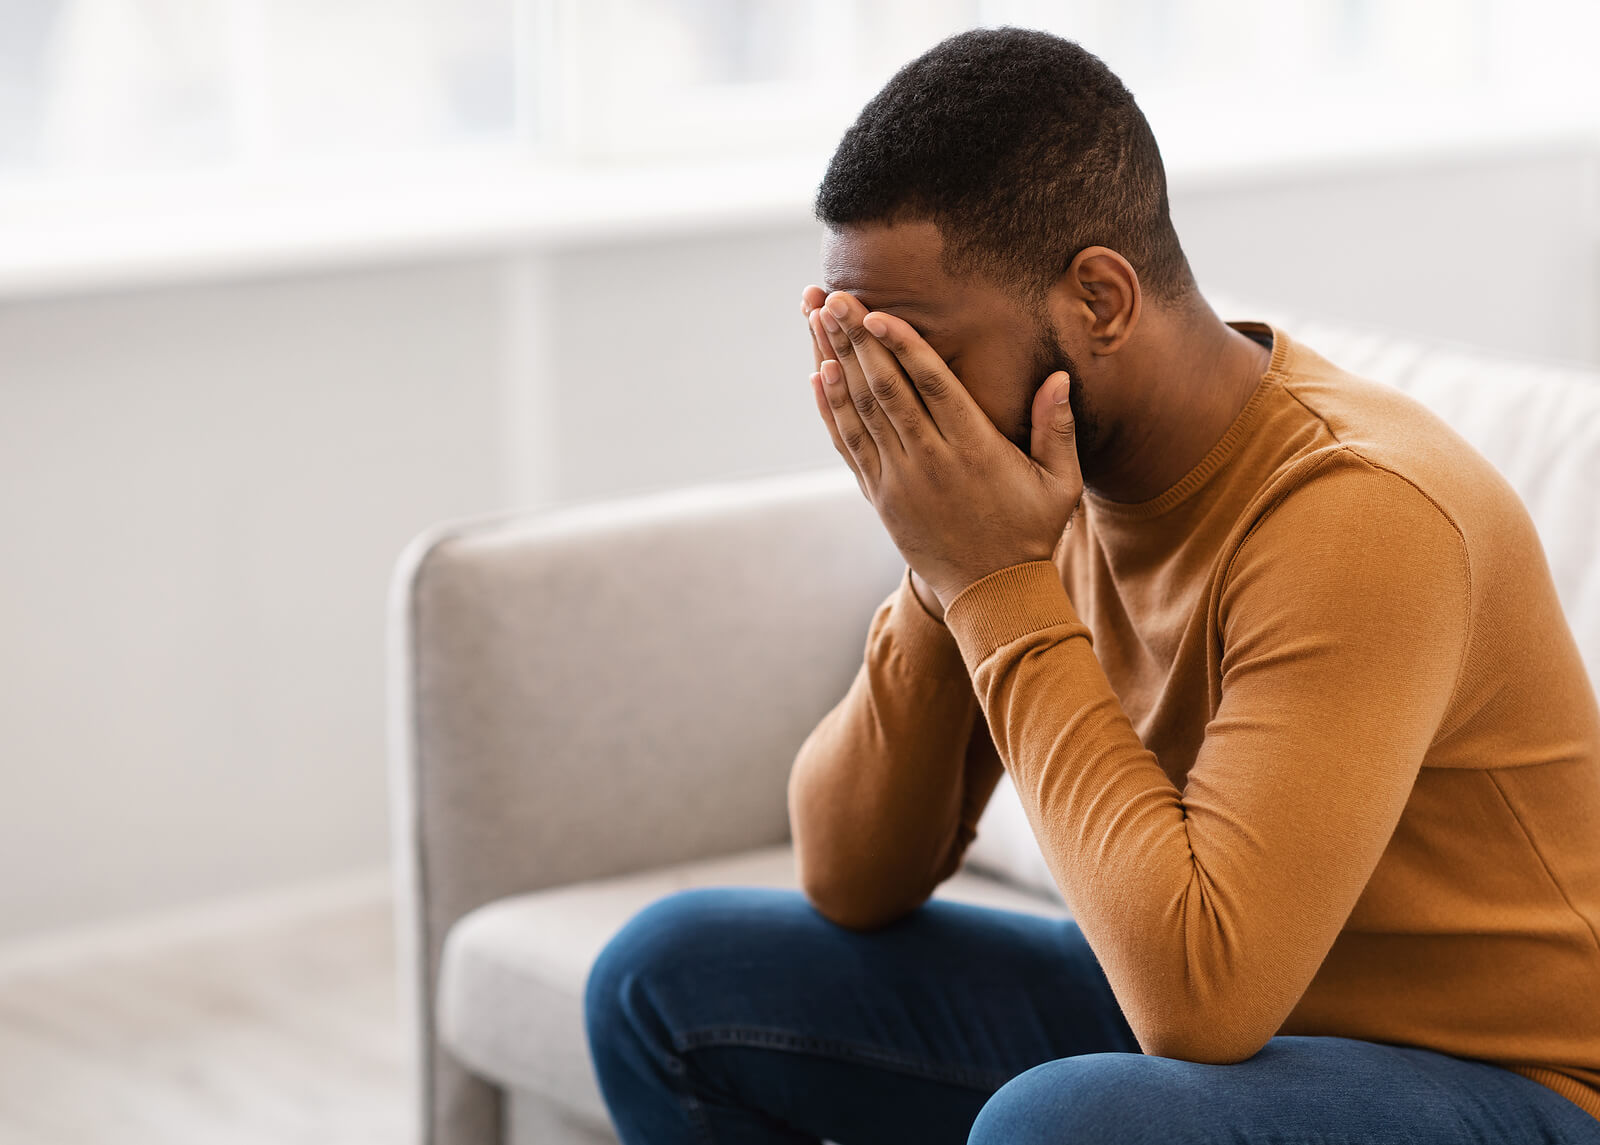 African-American male sits on couch with head in hands. PTSD can be all consuming in your life. Regain control with cognitive processing theory in Ohio.